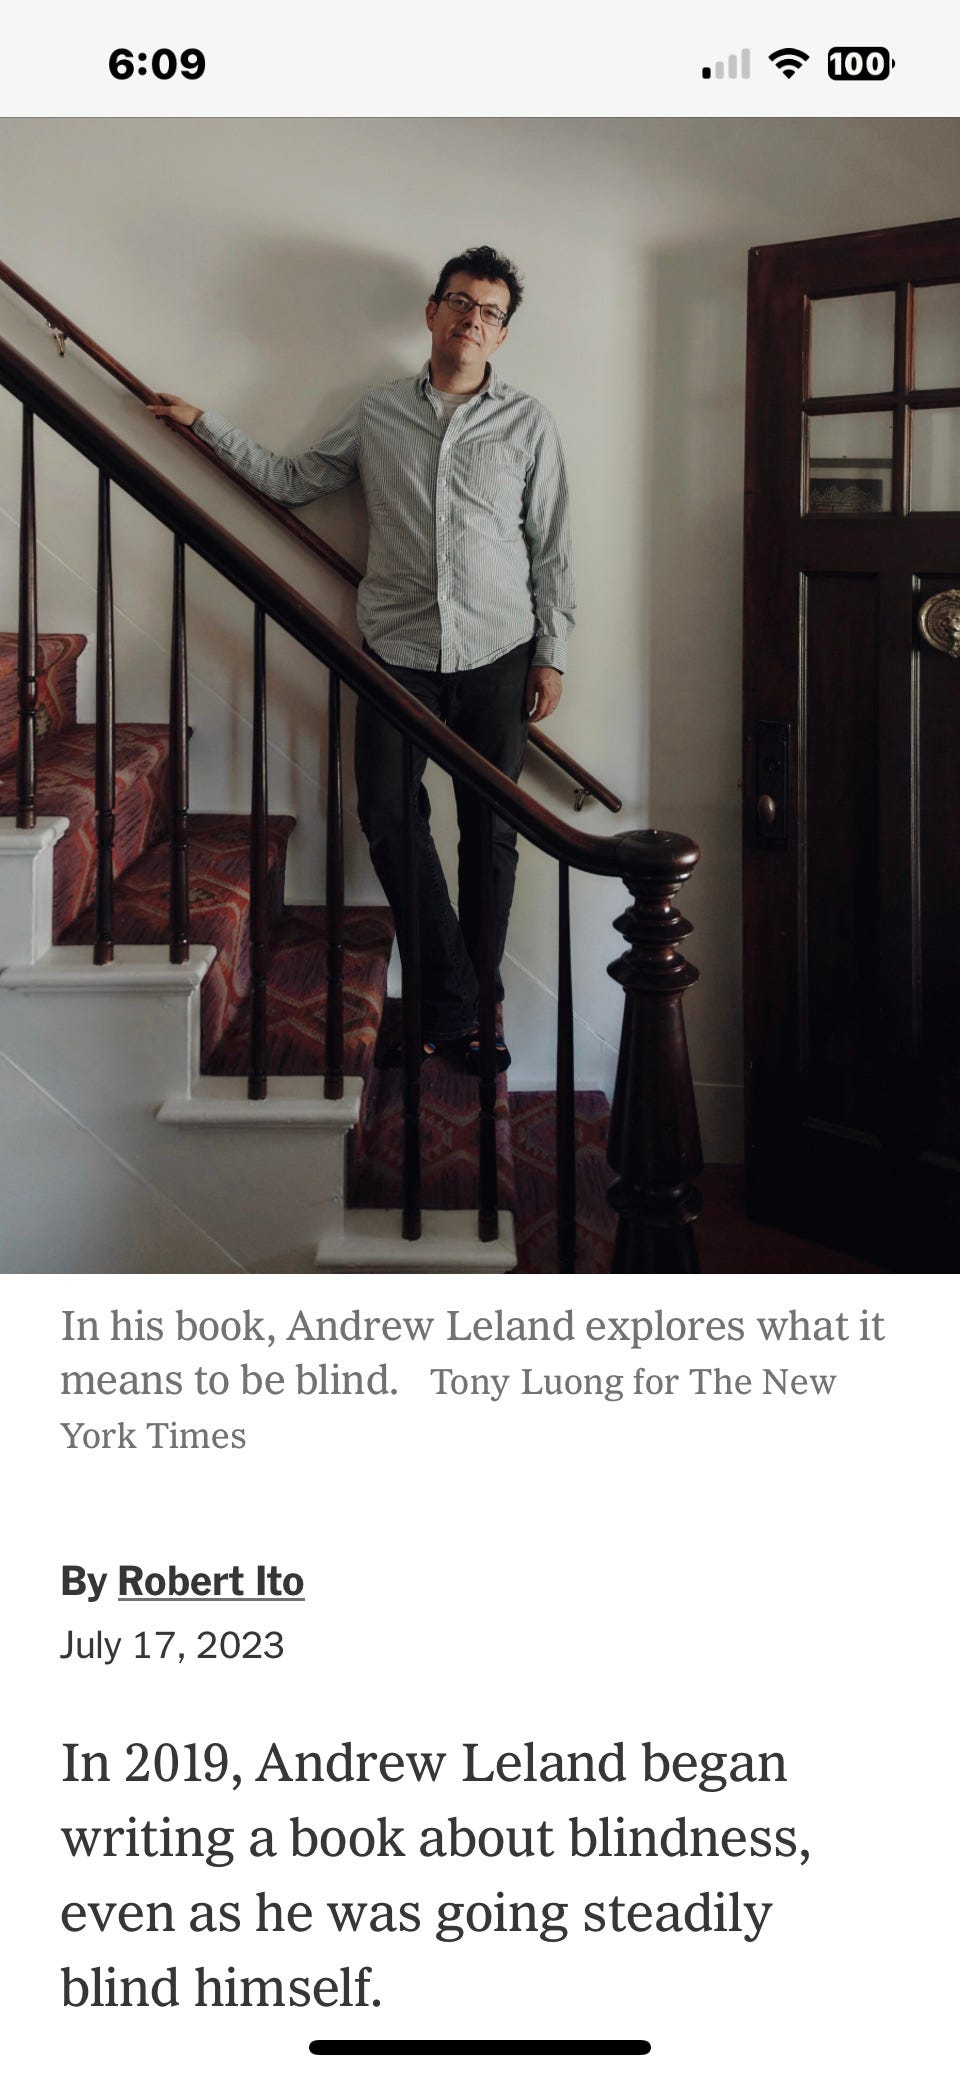 A screenshot of the New York Times profile linked below, with a photo of Andrew Leland standing on a flight of stairs that I will tell you are the stairs in my house ok